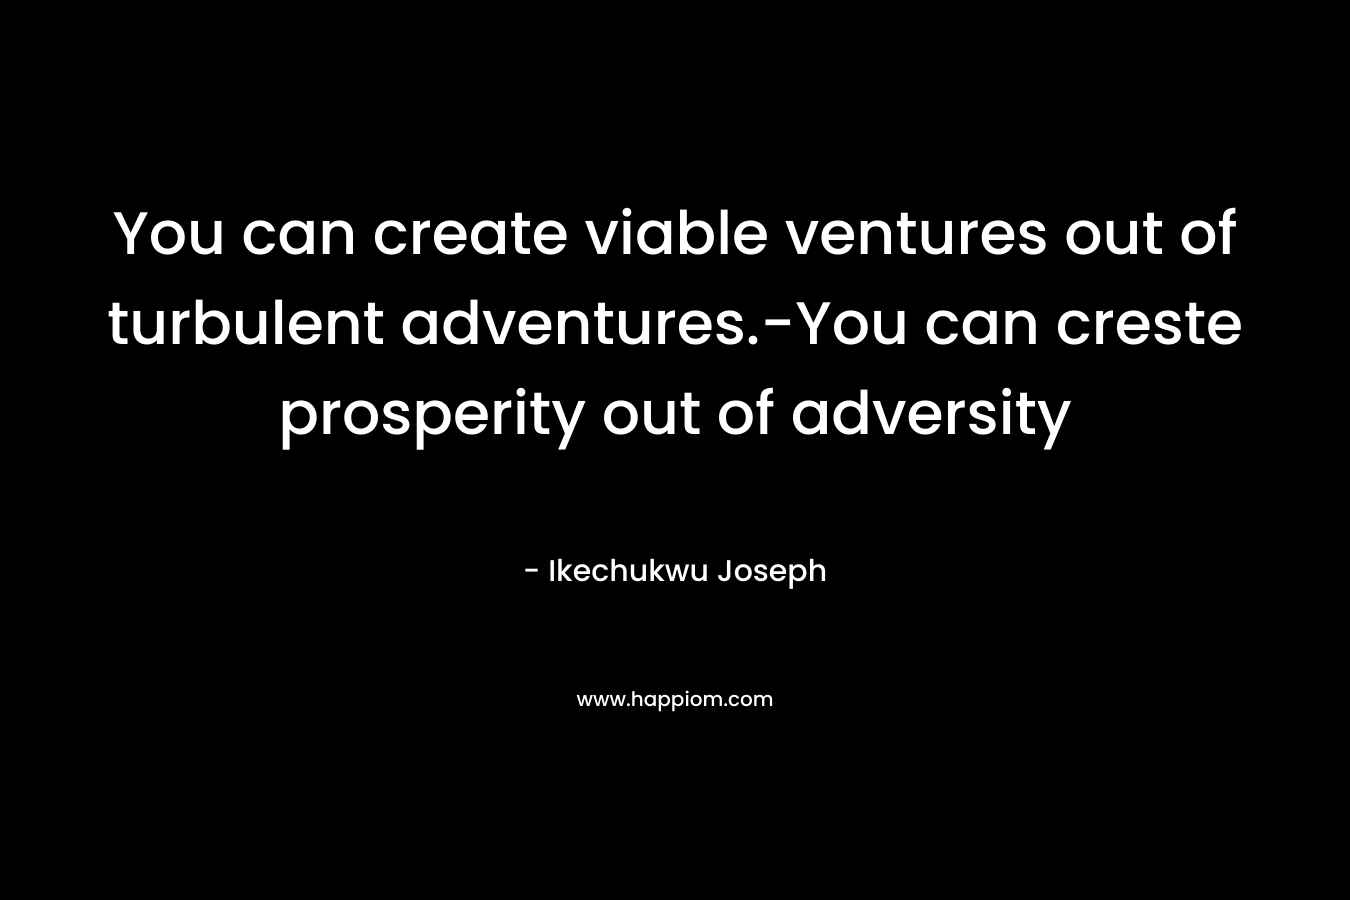 You can create viable ventures out of turbulent adventures.-You can creste prosperity out of adversity